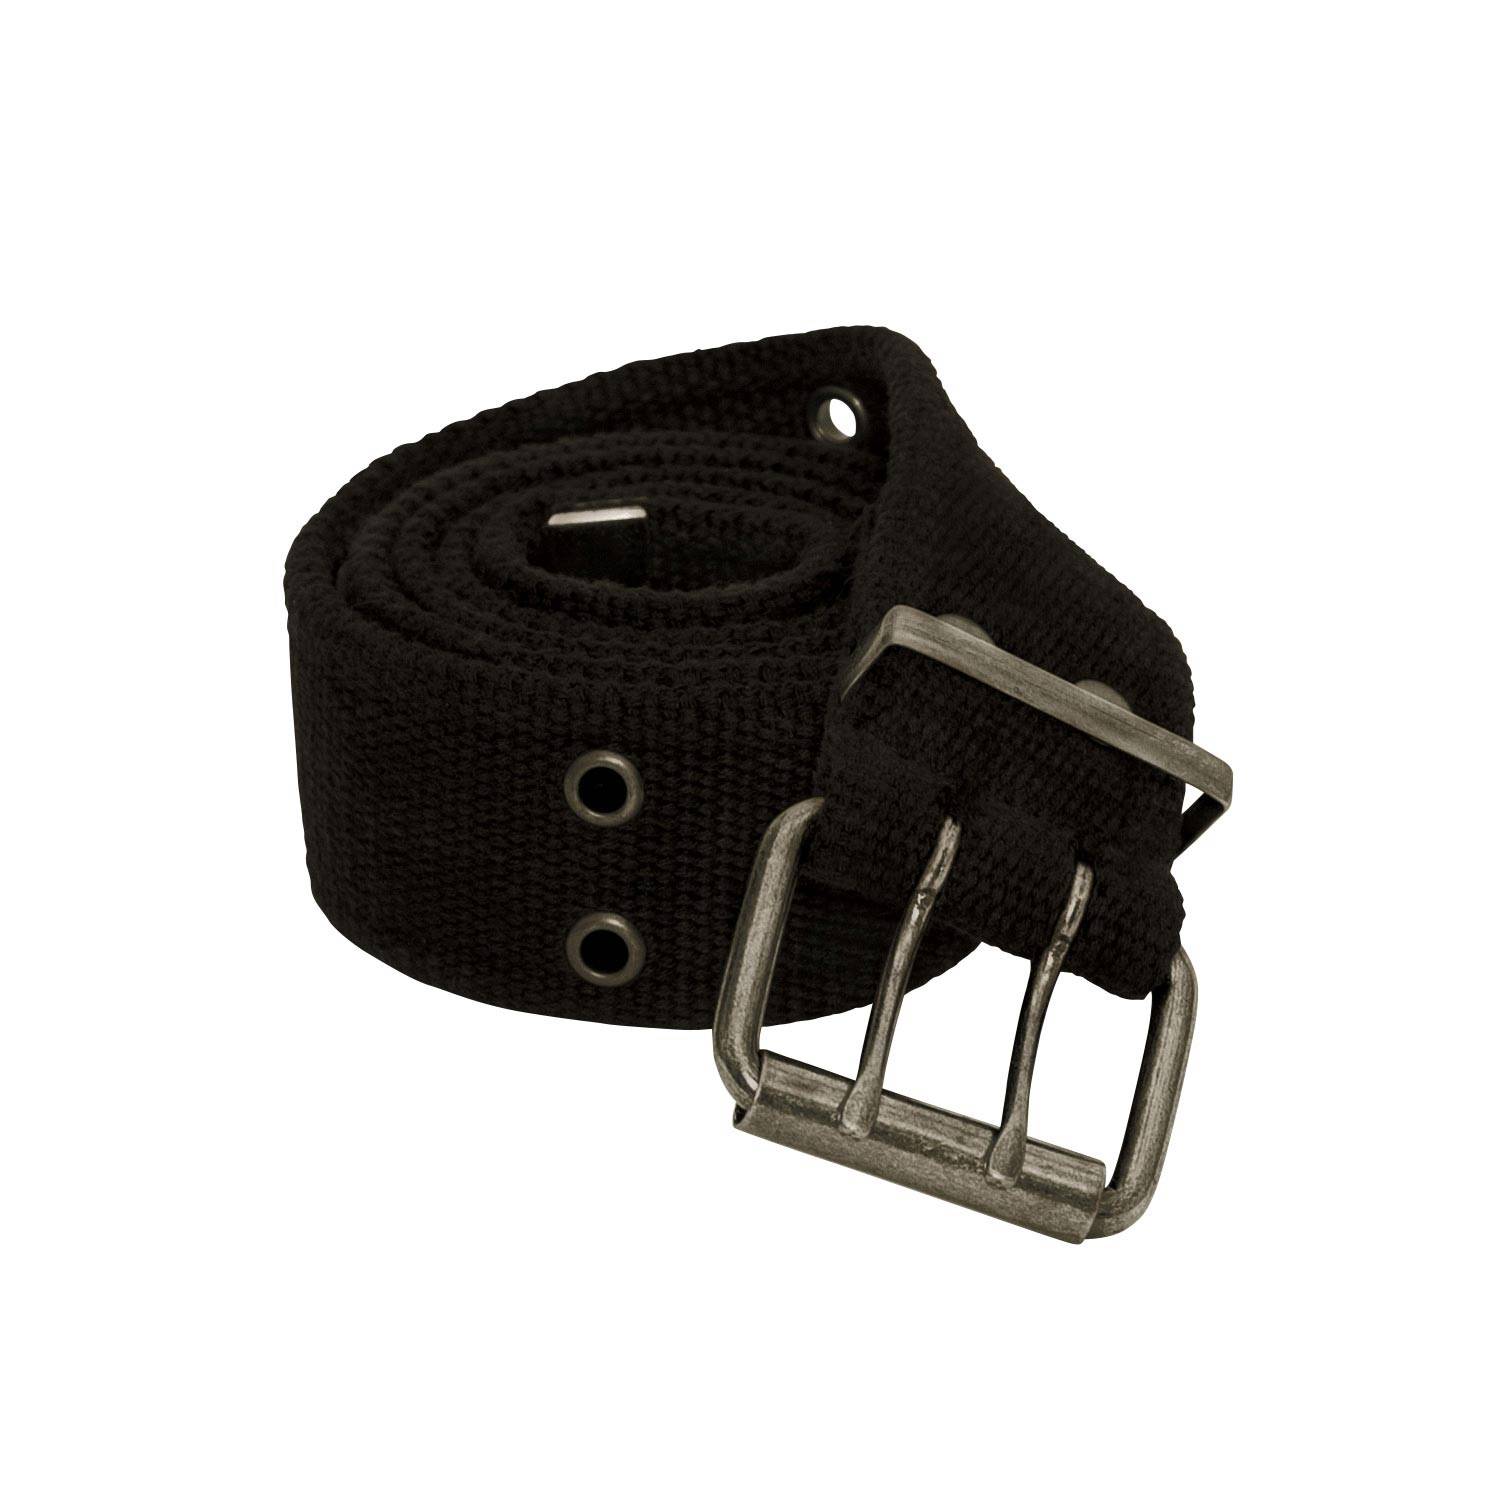 ROTHCO ULTRA FORCE VINTAGE BELT WITH DOUBLE PRONG BUCKLE